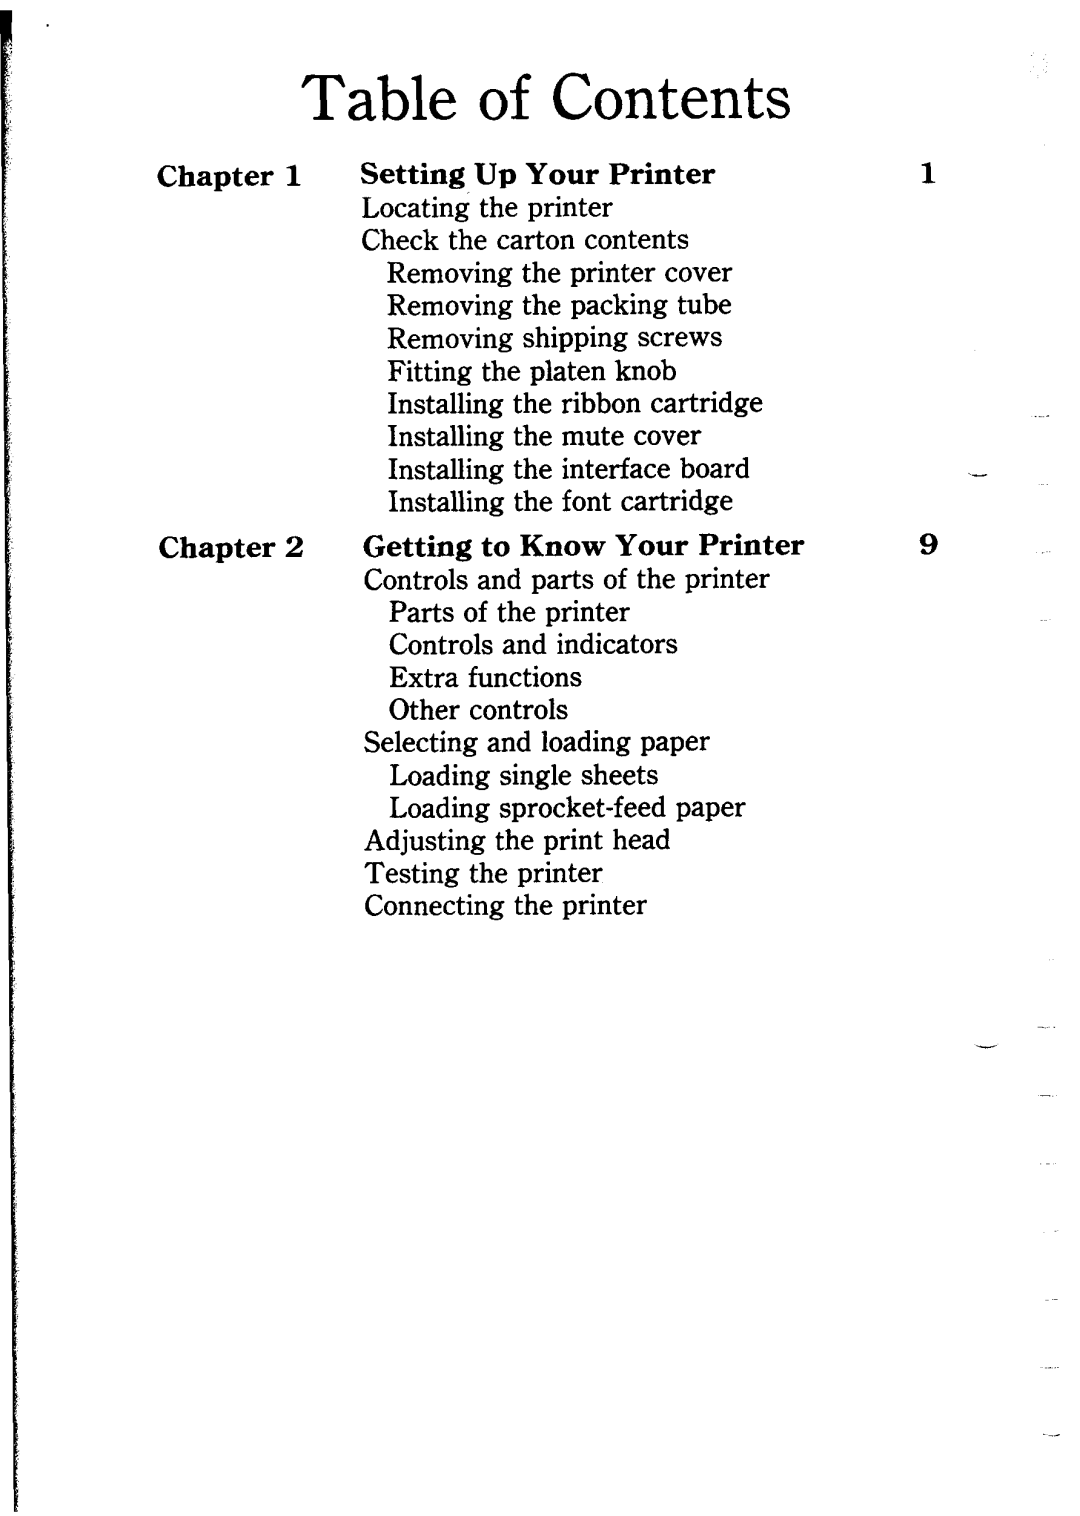 Star Micronics NB24-10/15 user manual Table of Contents, Chapter Chapter, Setting Up Your Printer, Getting to Know 